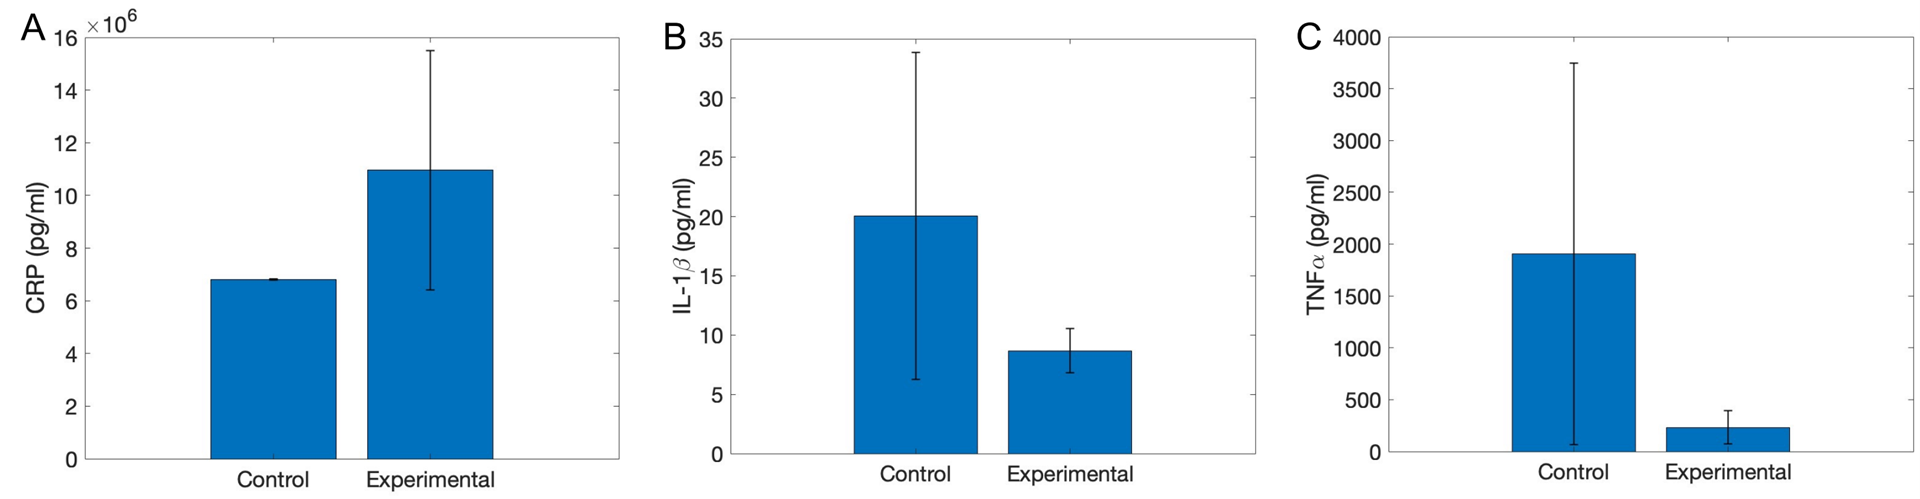 Results from the experiment showing cytokine levels